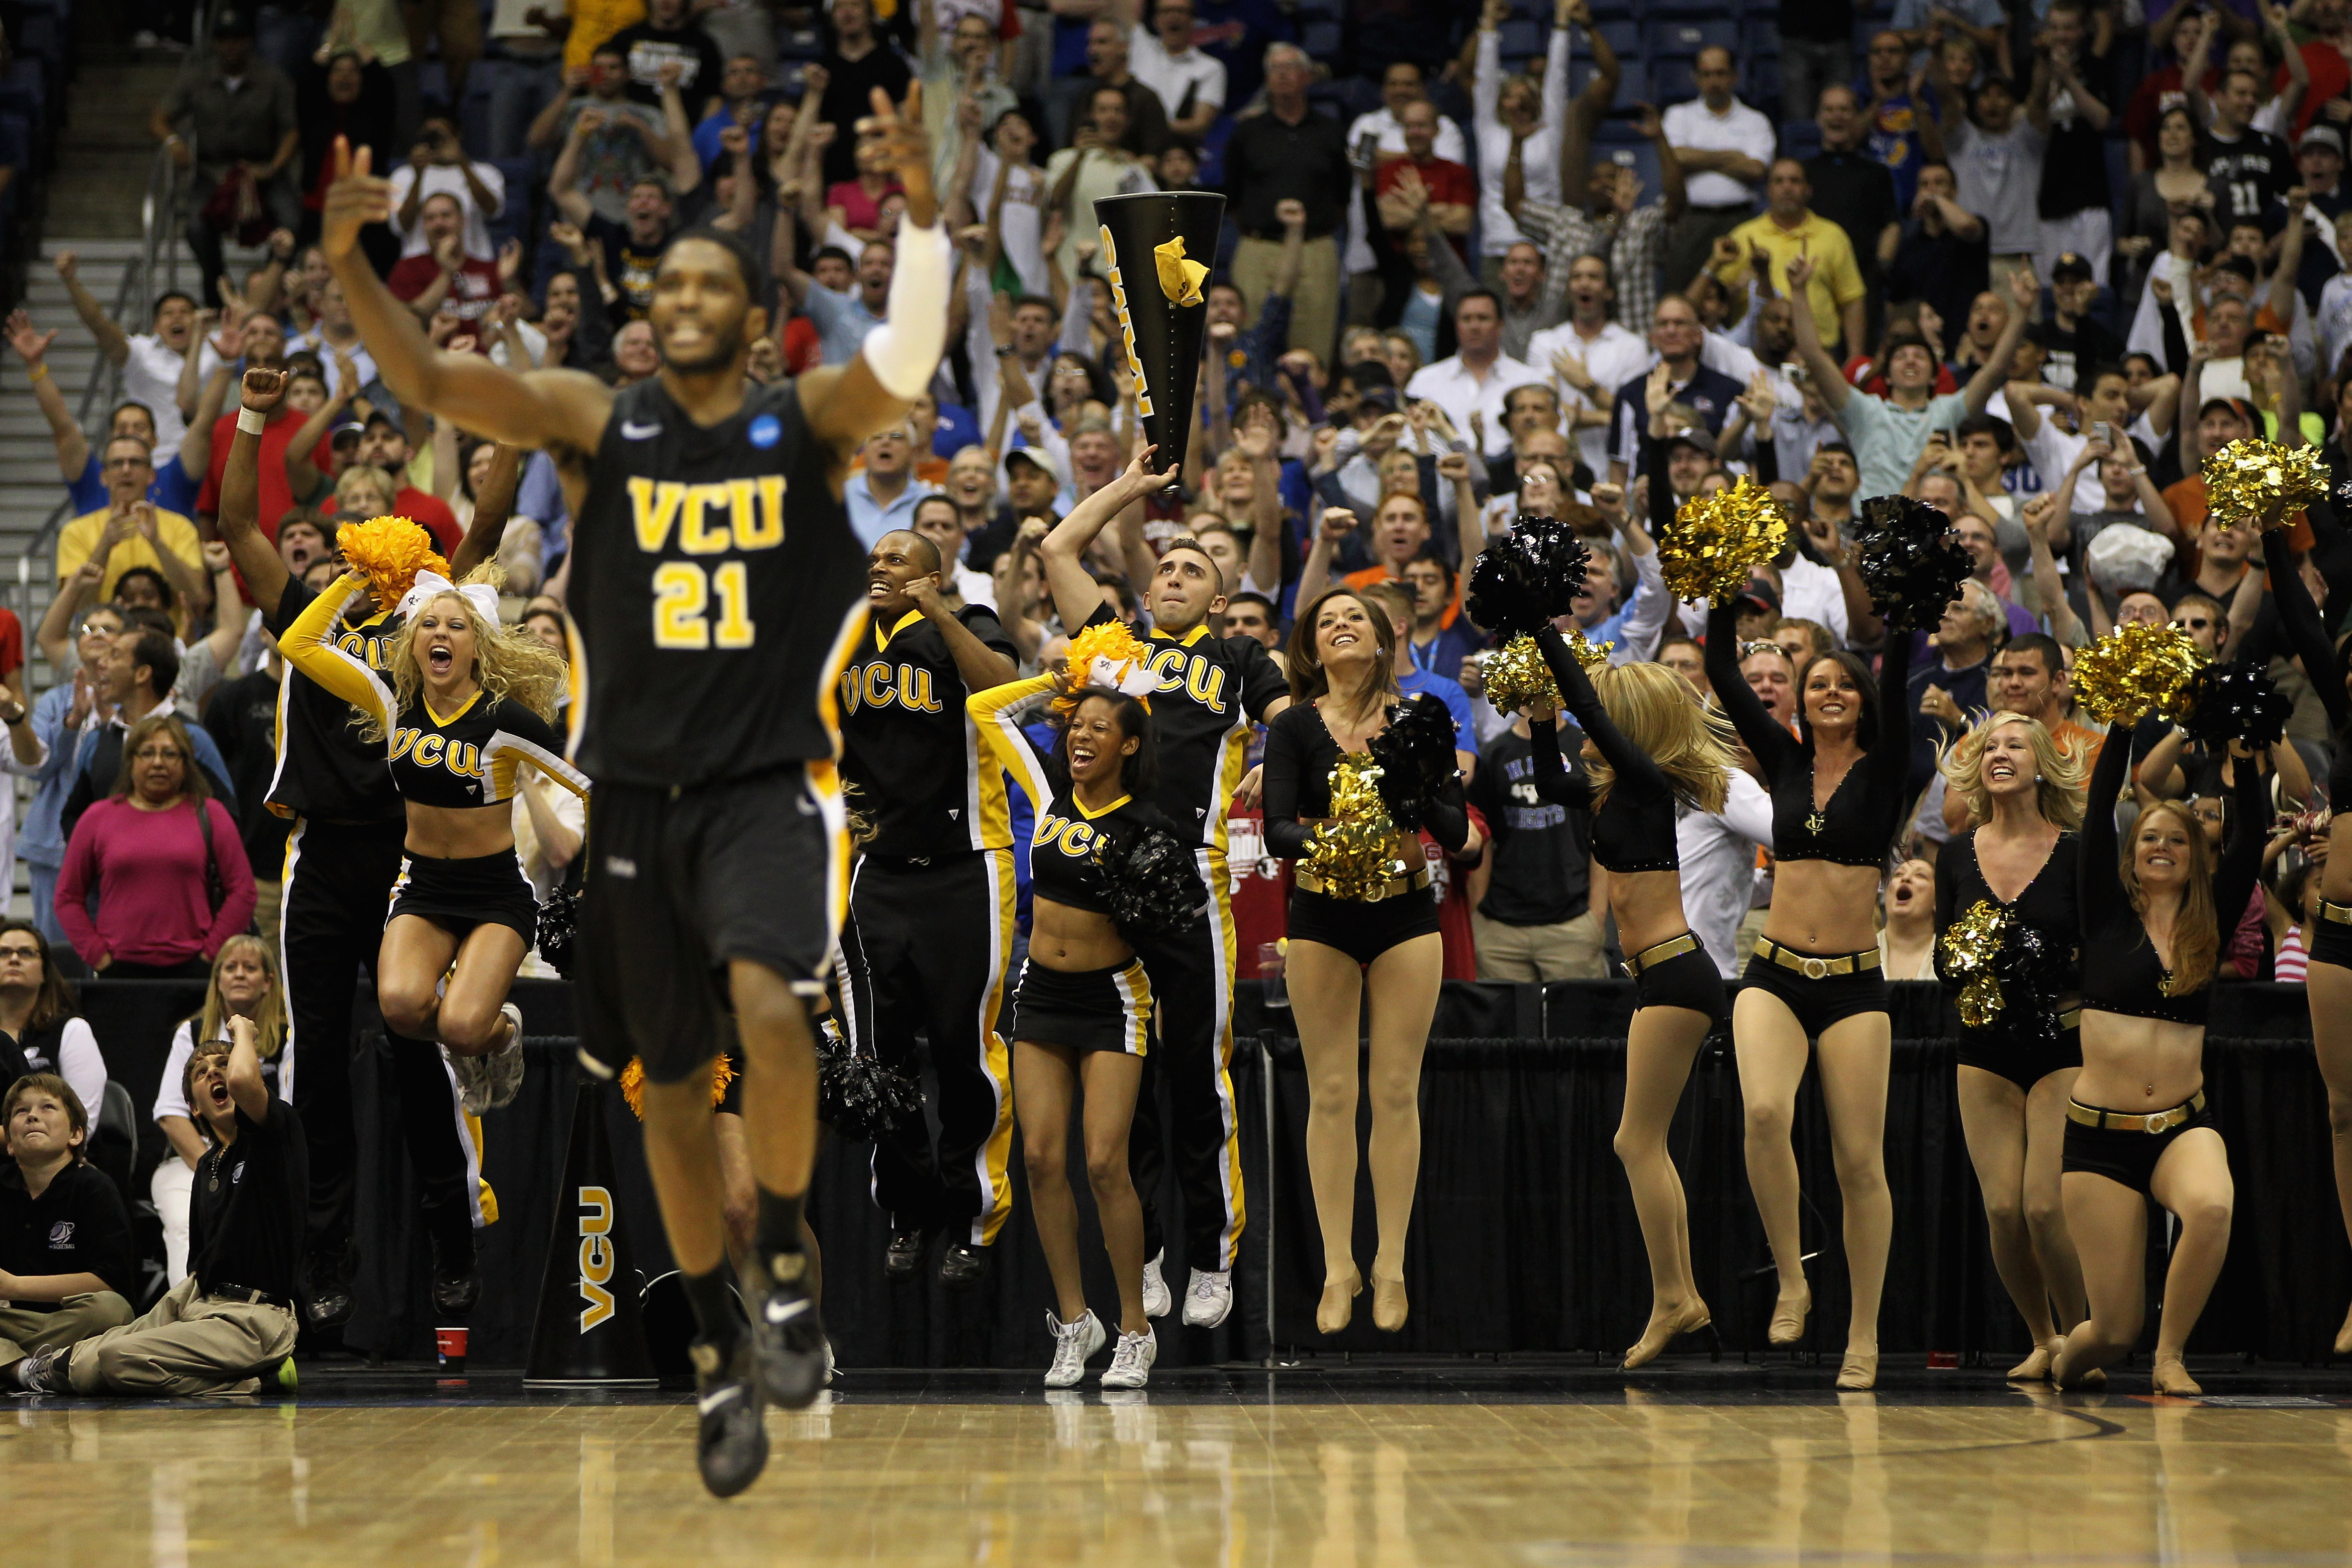 SAN ANTONIO, TX - MARCH 25:  Jamie Skeen #21 of the Virginia Commonwealth Rams and the VCU fans celebrate after defeating the Florida State Seminoles during the southwest regional of the 2011 NCAA men's basketball tournament at the Alamodome on March 25,